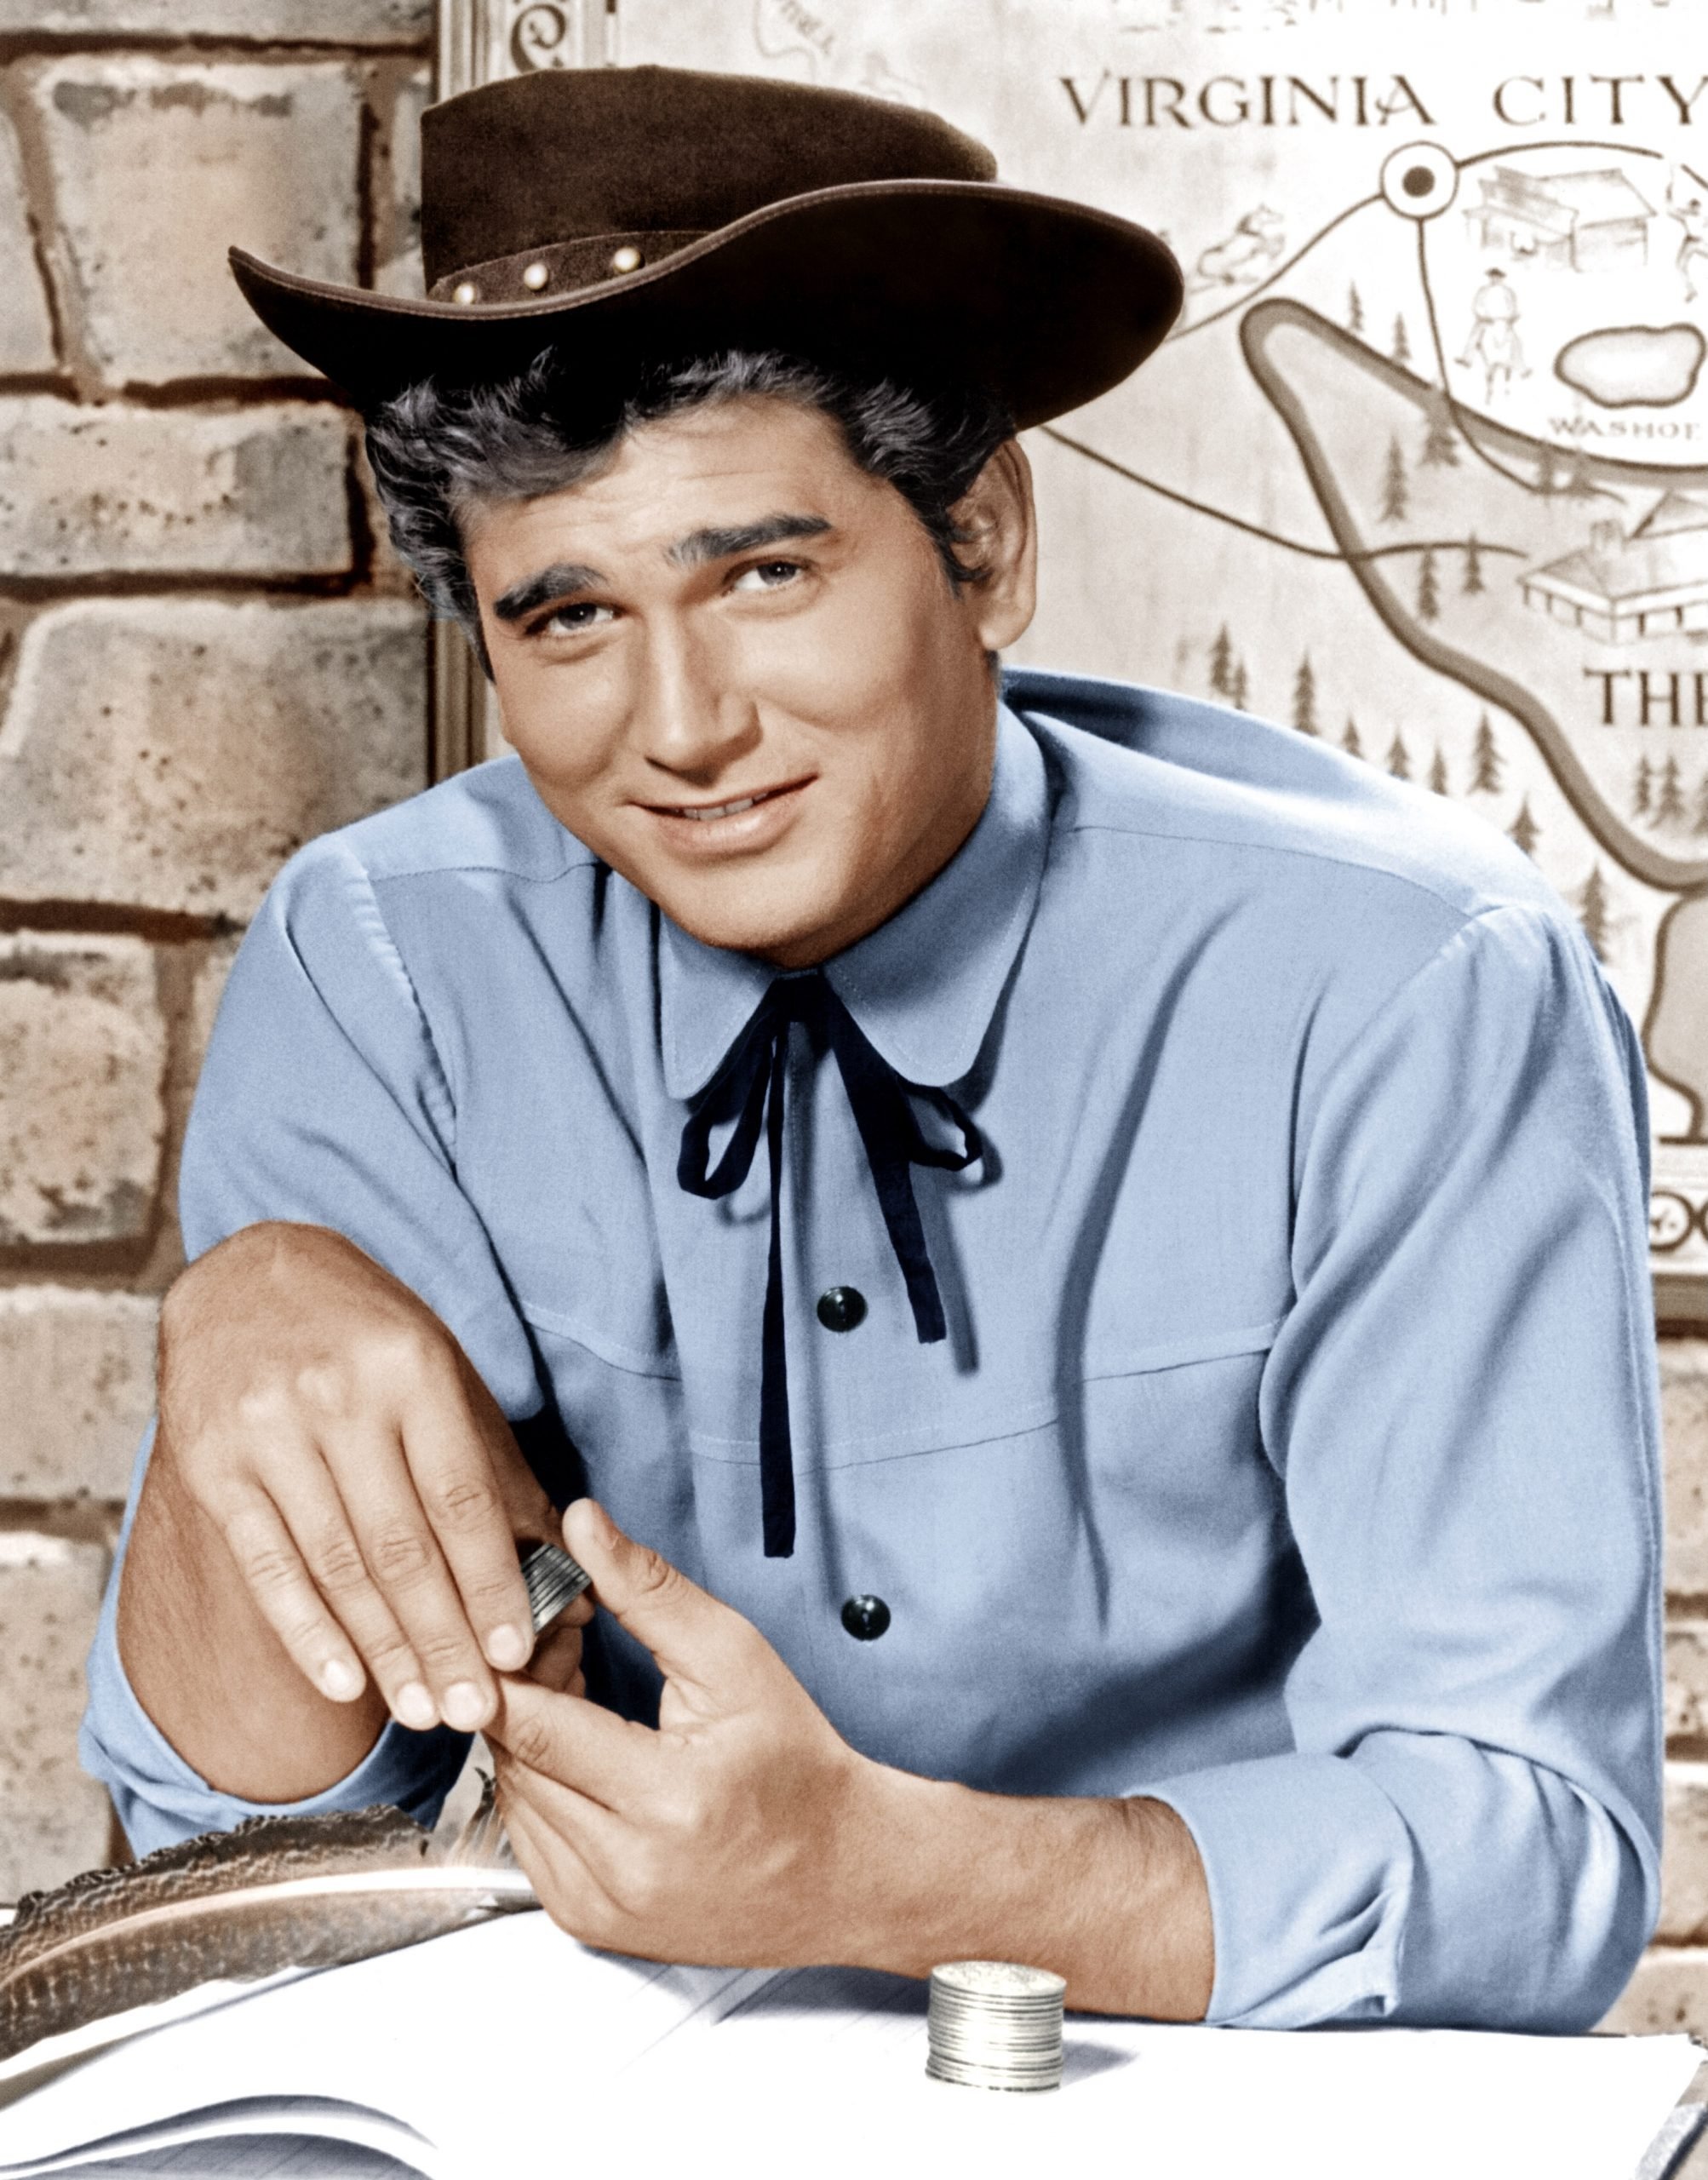 Before stardom, Michael Landon actually endured a lot of stress